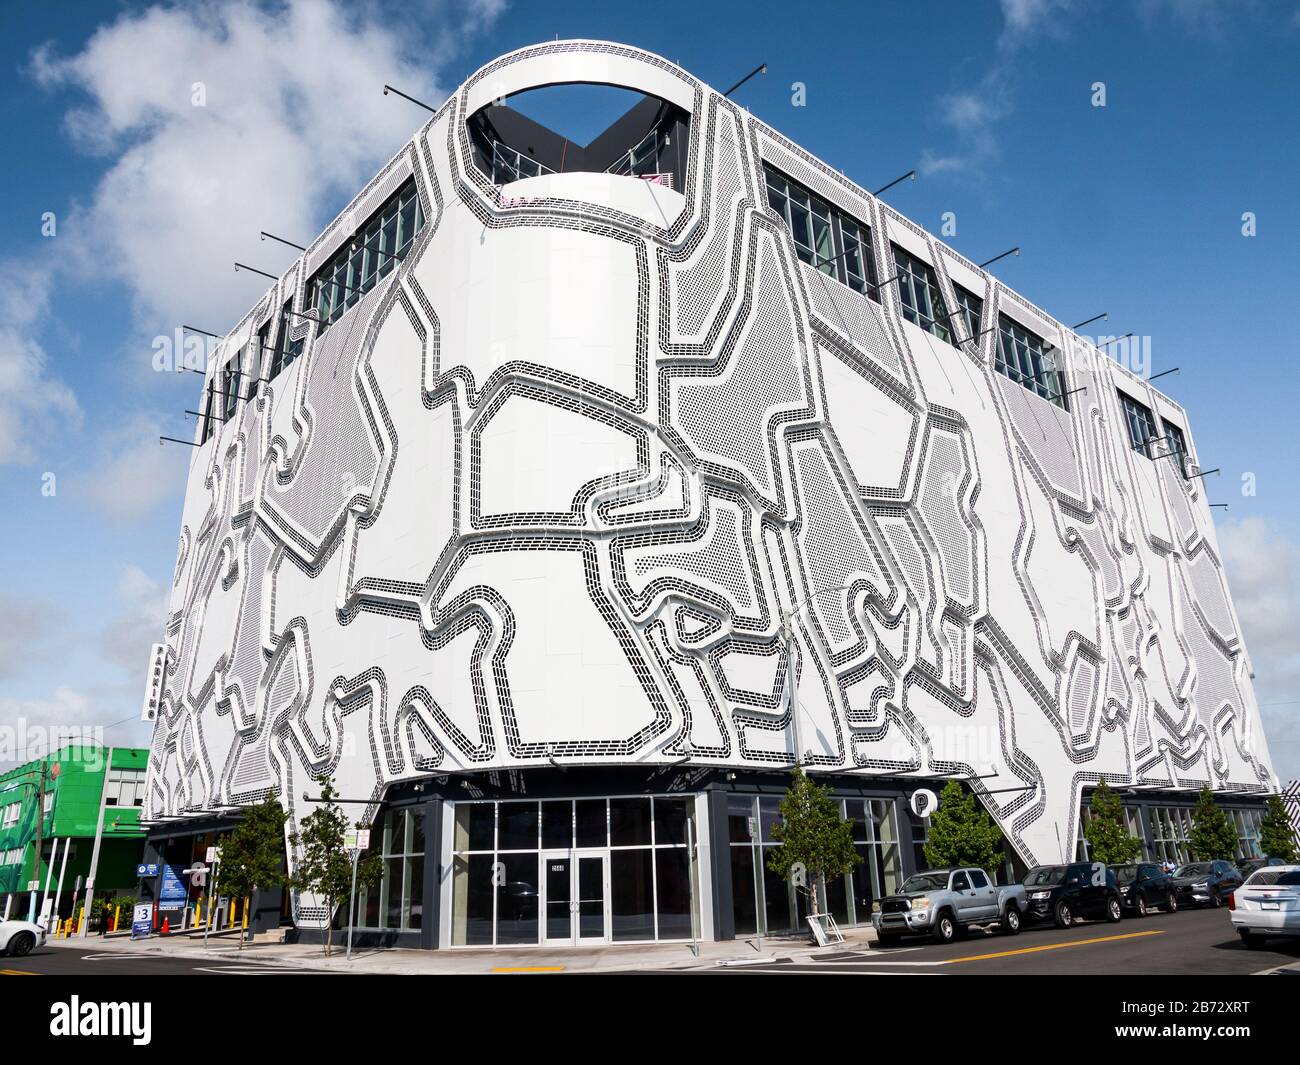 The Wynwood Garage facade, Miami, Florida. July 2019. Beautiful wide-angle shot of this unique contemporary building in the art district of Miami. Stock Photo